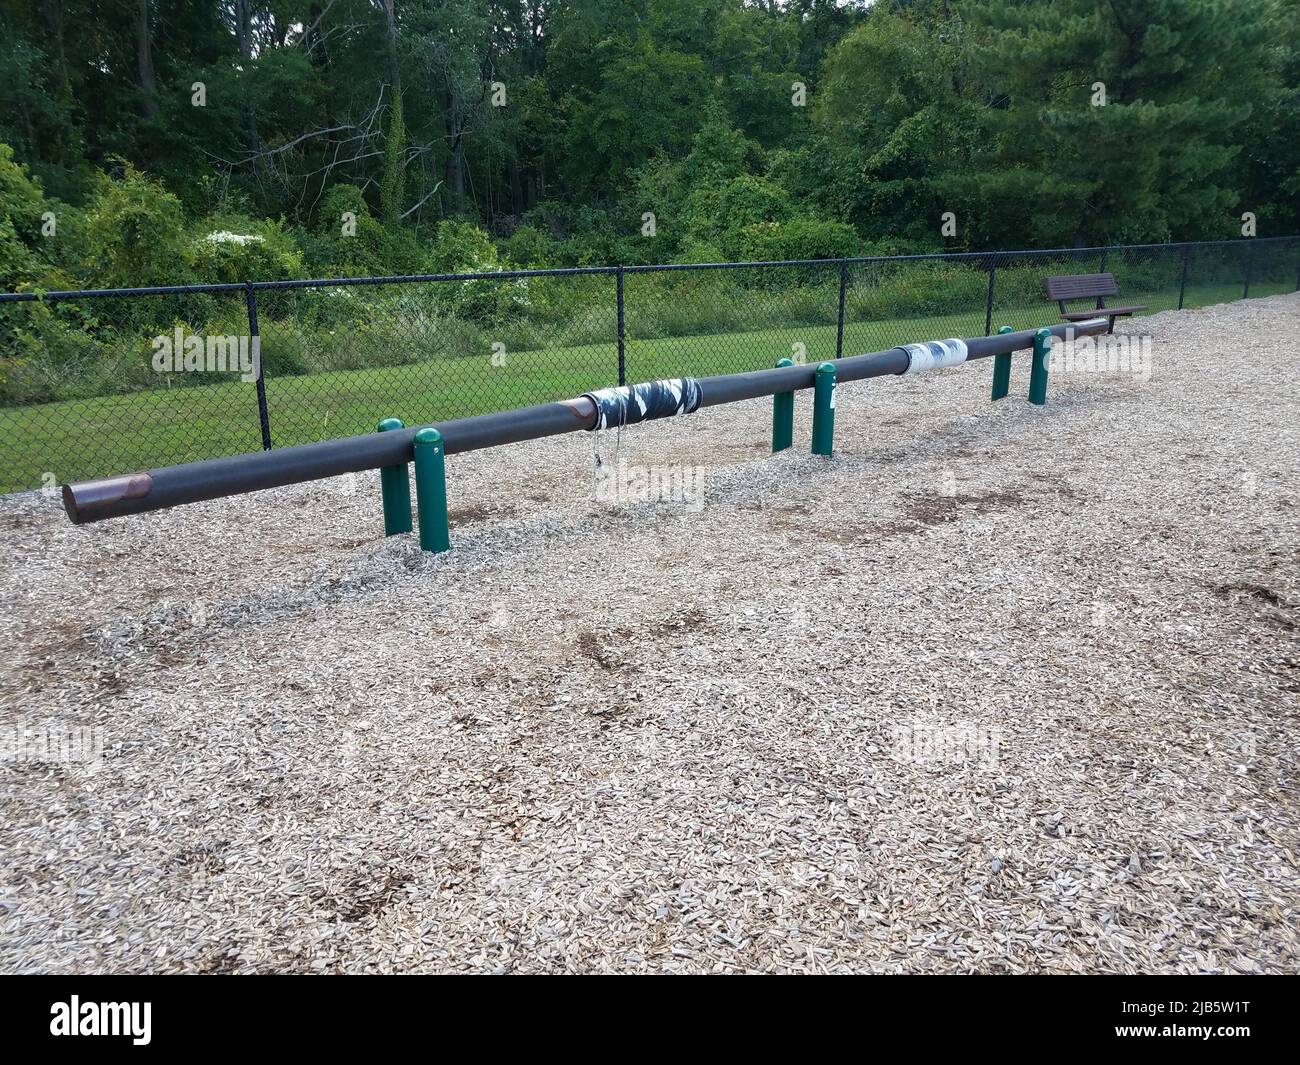 long balance beam at playground or park with brown wood chips. Stock Photo